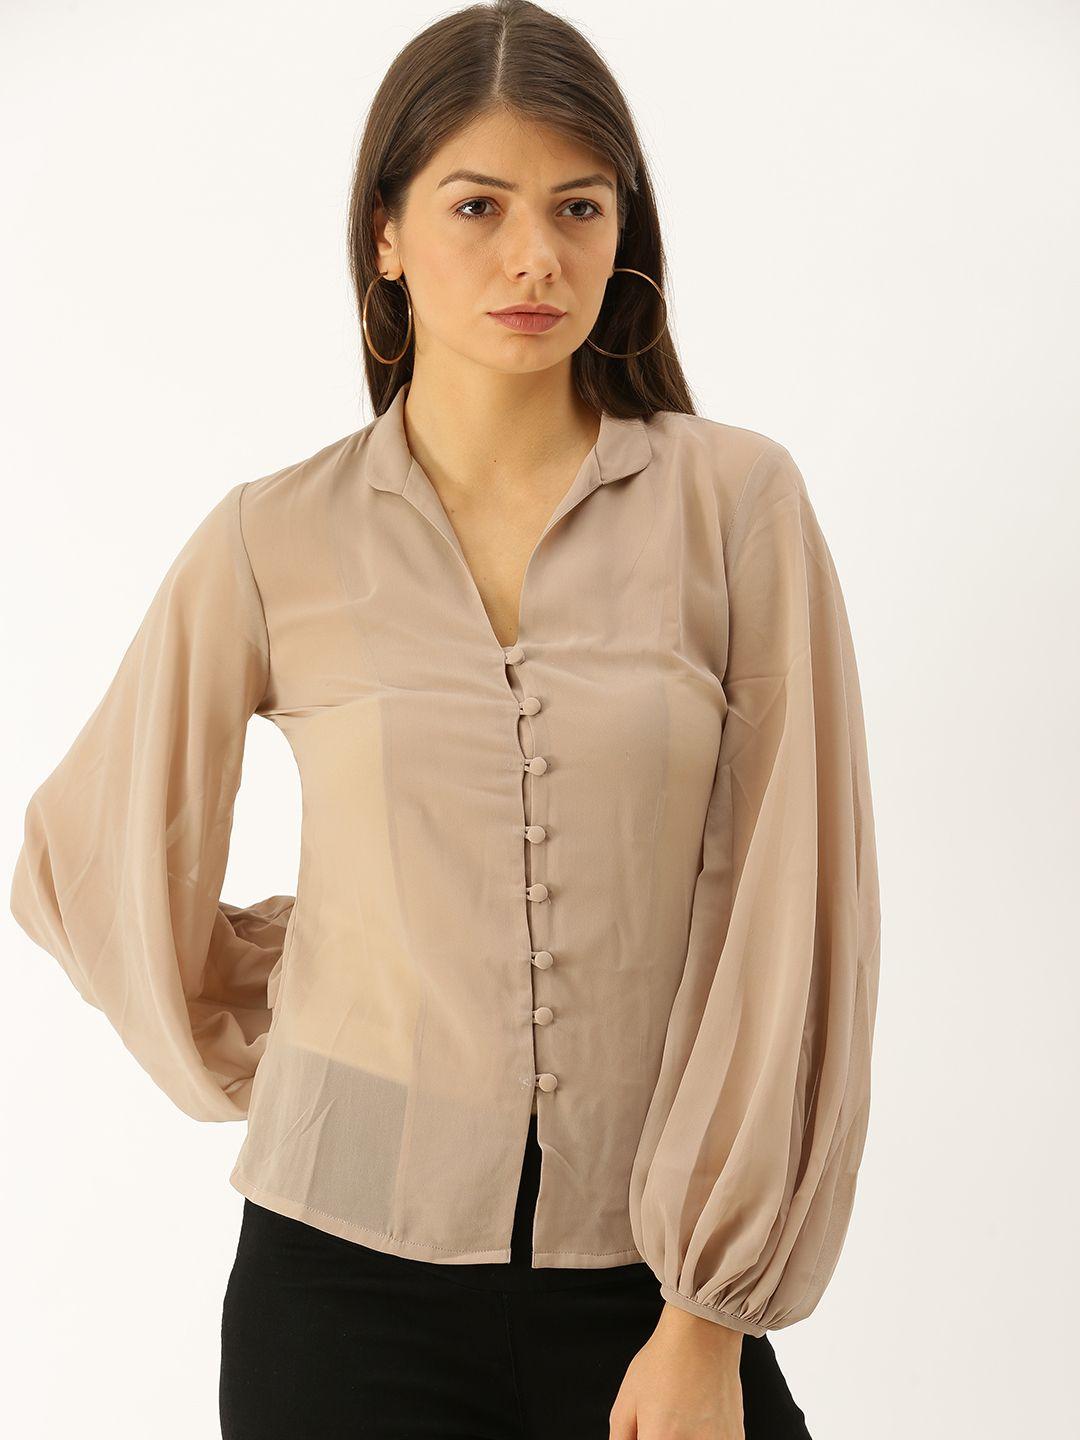 mabish by sonal jain women taupe solid top